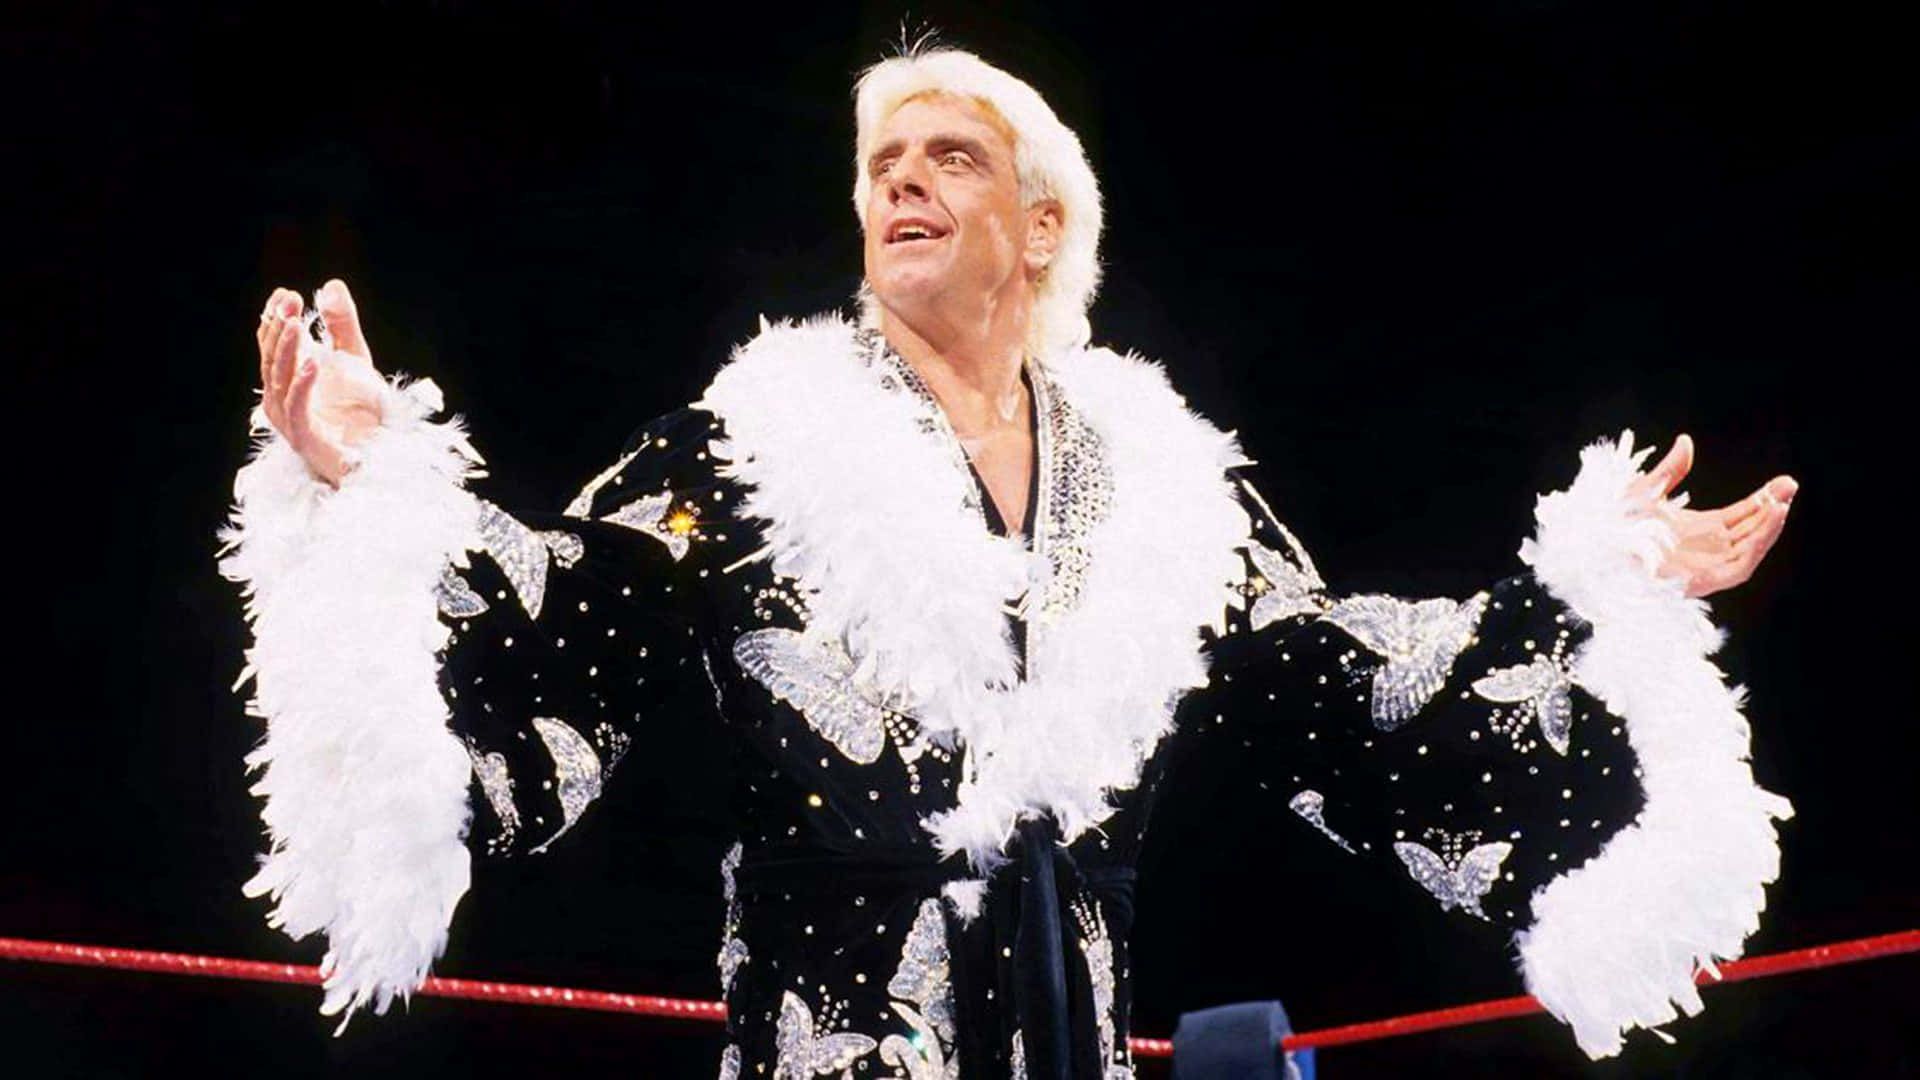 Ric Flair Wearing Black Robe With White Fur Background